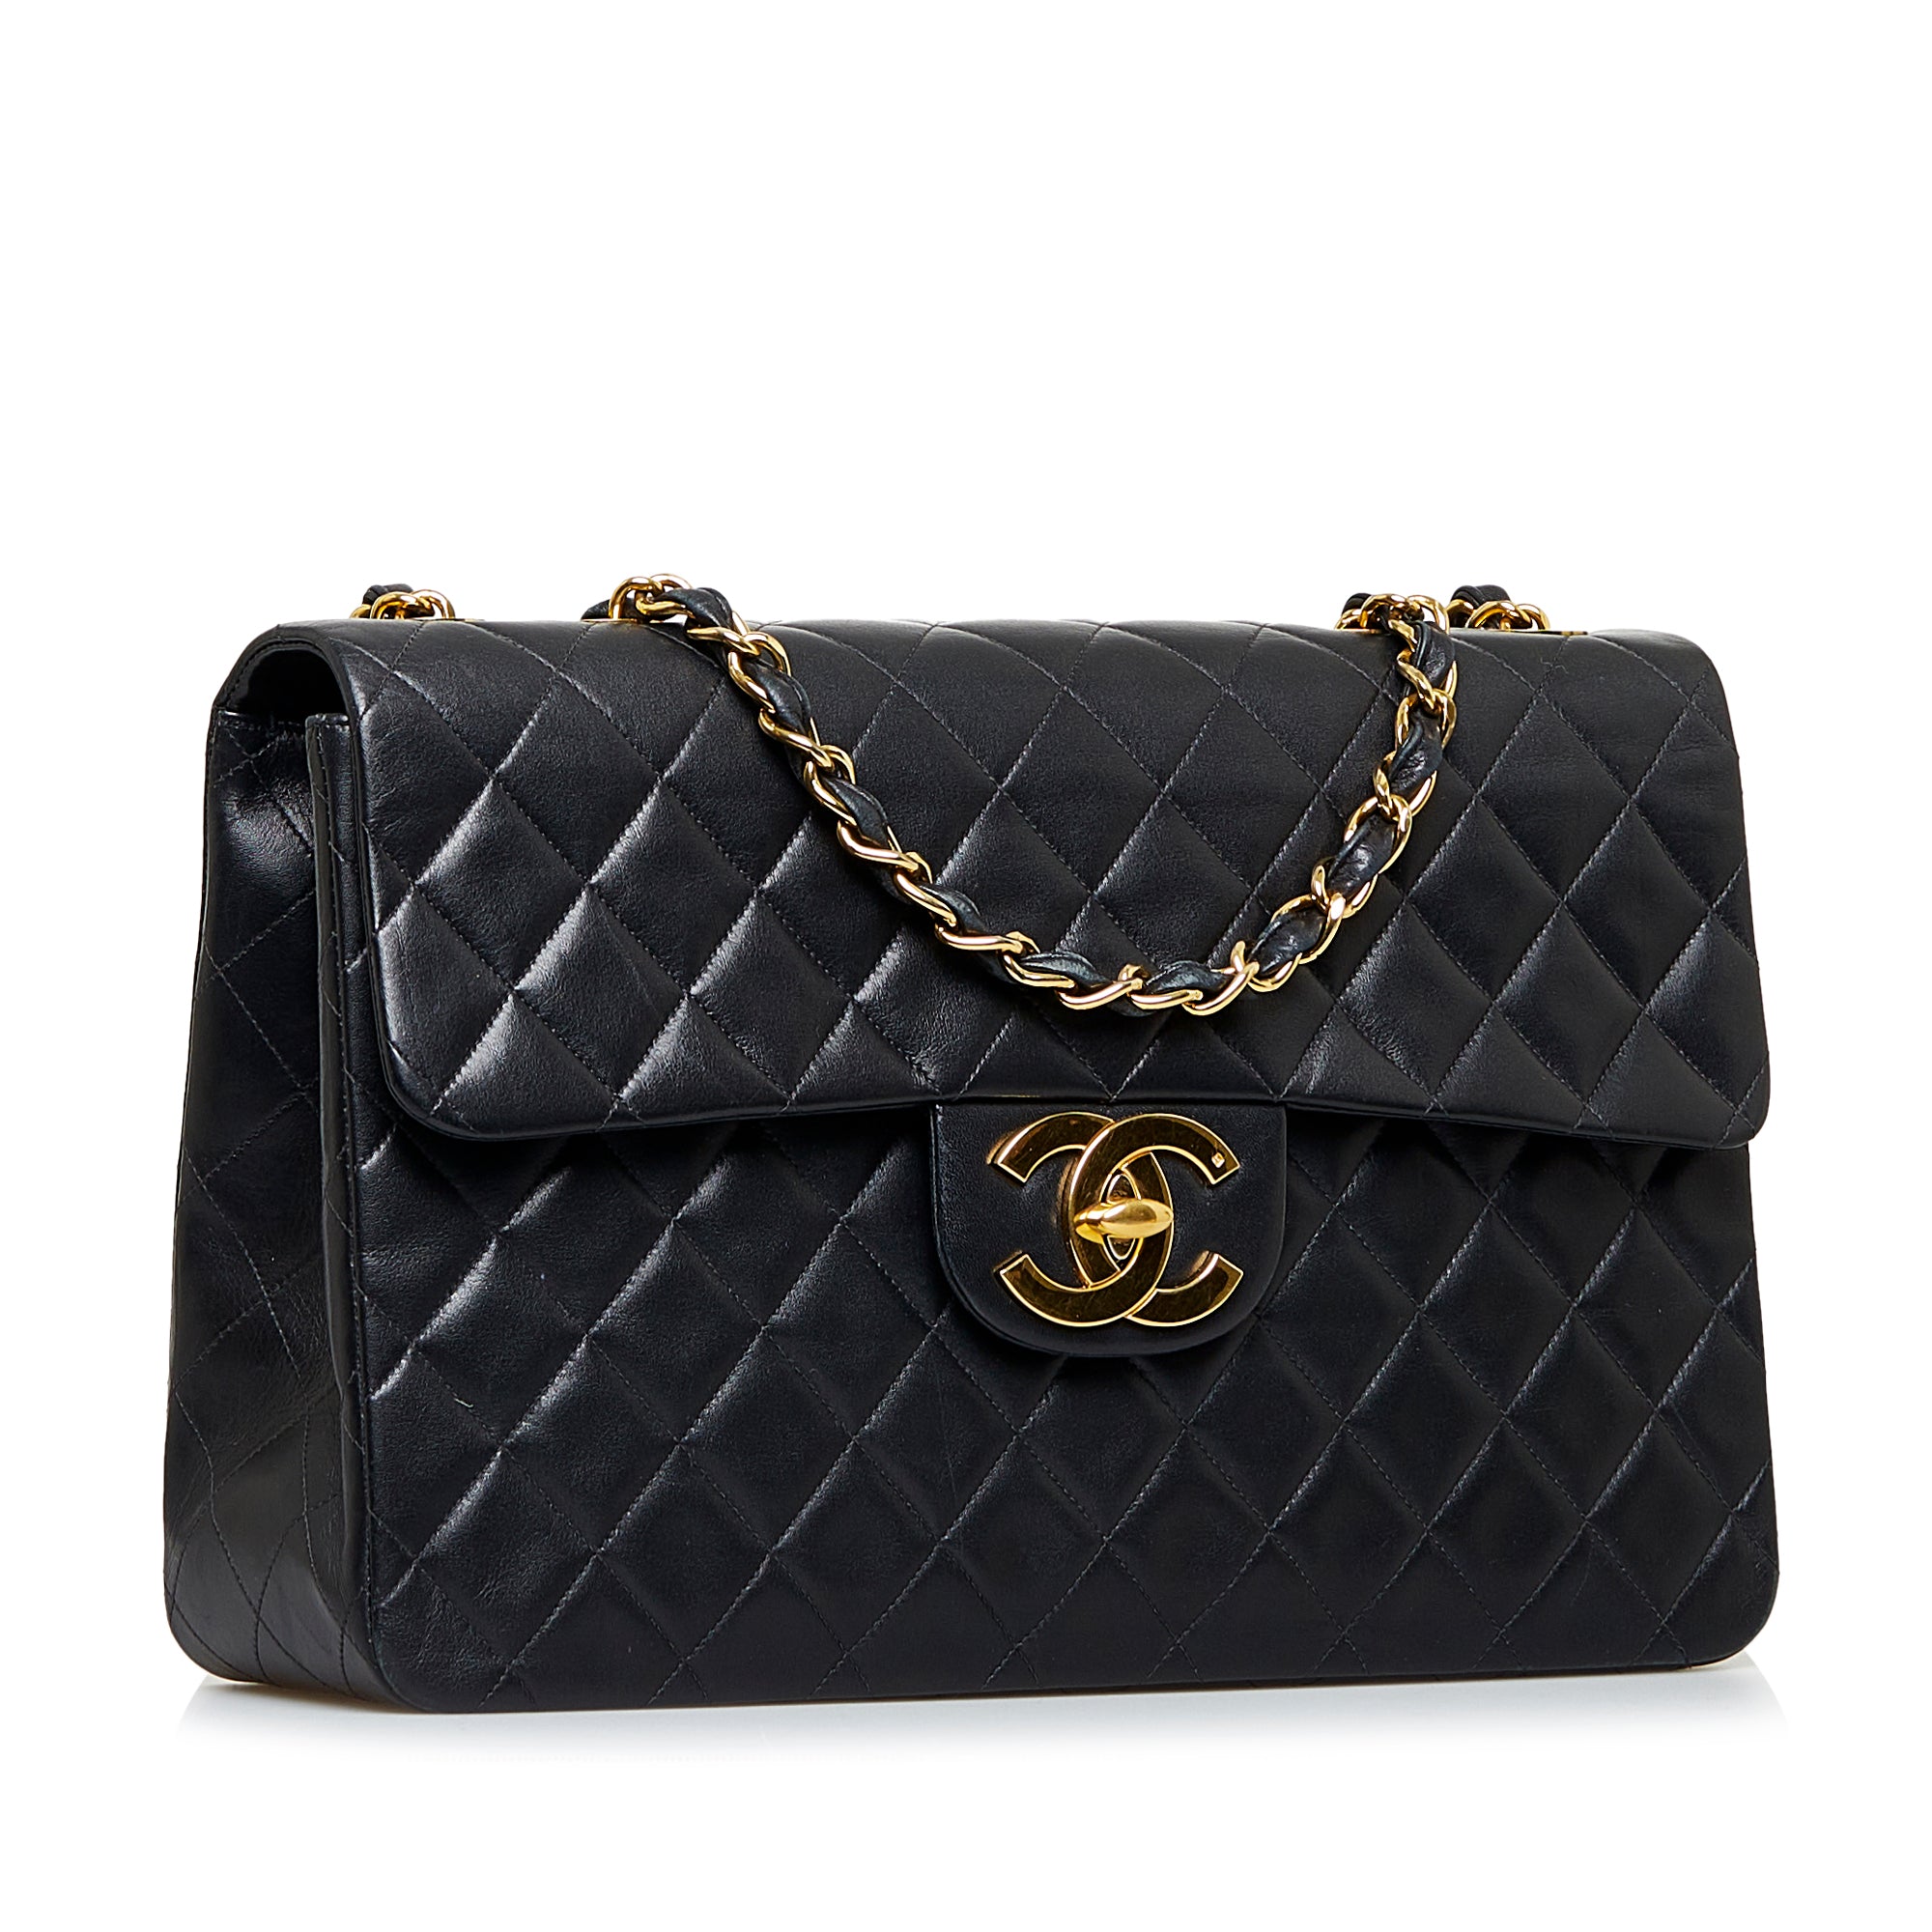 Chanel Black Quilted Caviar Leather Maxi Classic Single Flap Bag Chanel |  The Luxury Closet